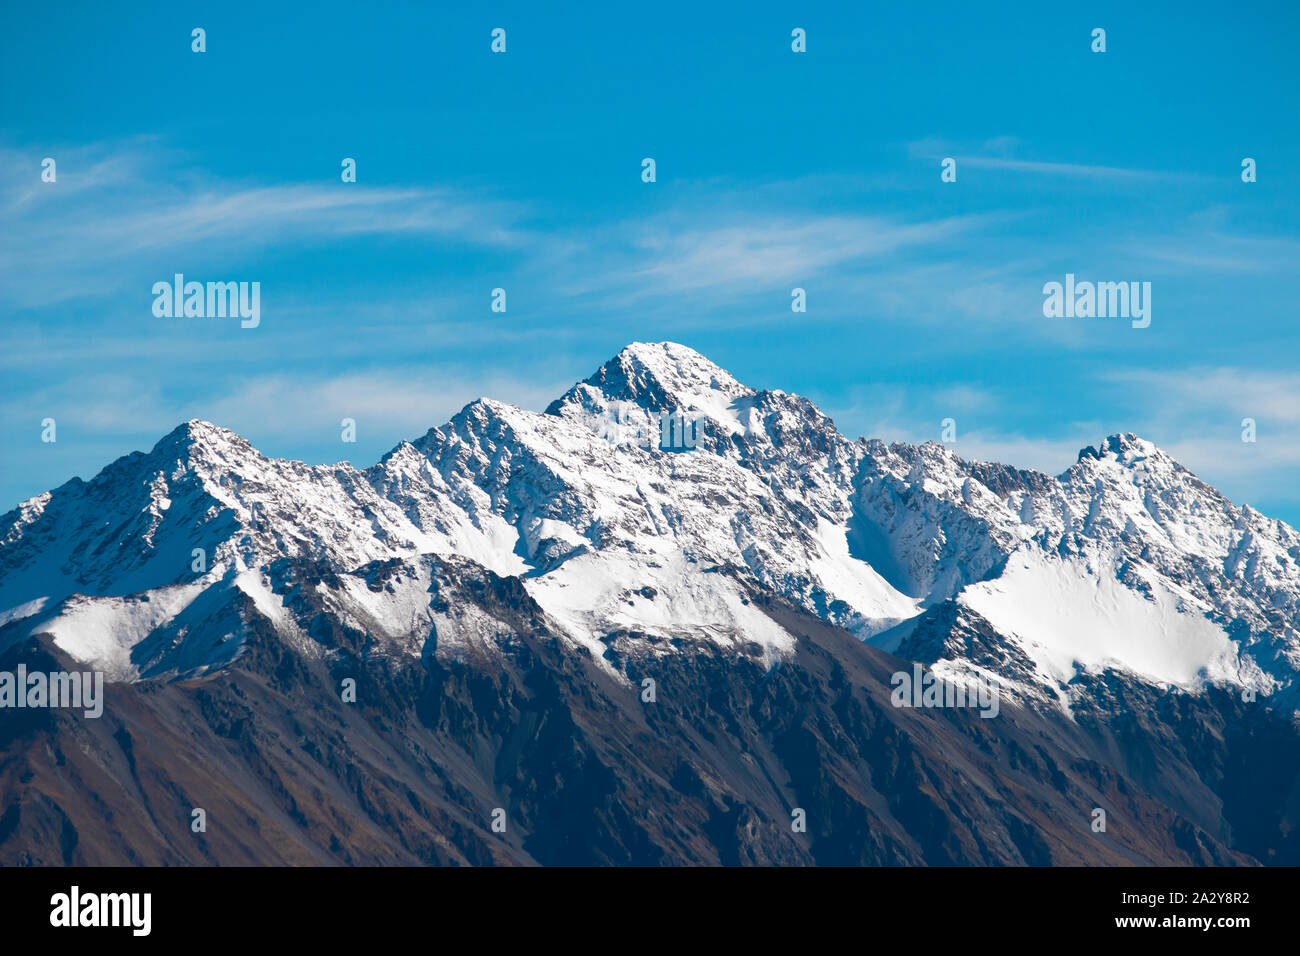 Mountains Winter Landscape With Snow Snow Capped Mountain Range In Canterbury New Zealand Ice Cold Winter Season Environment Stock Photo Alamy